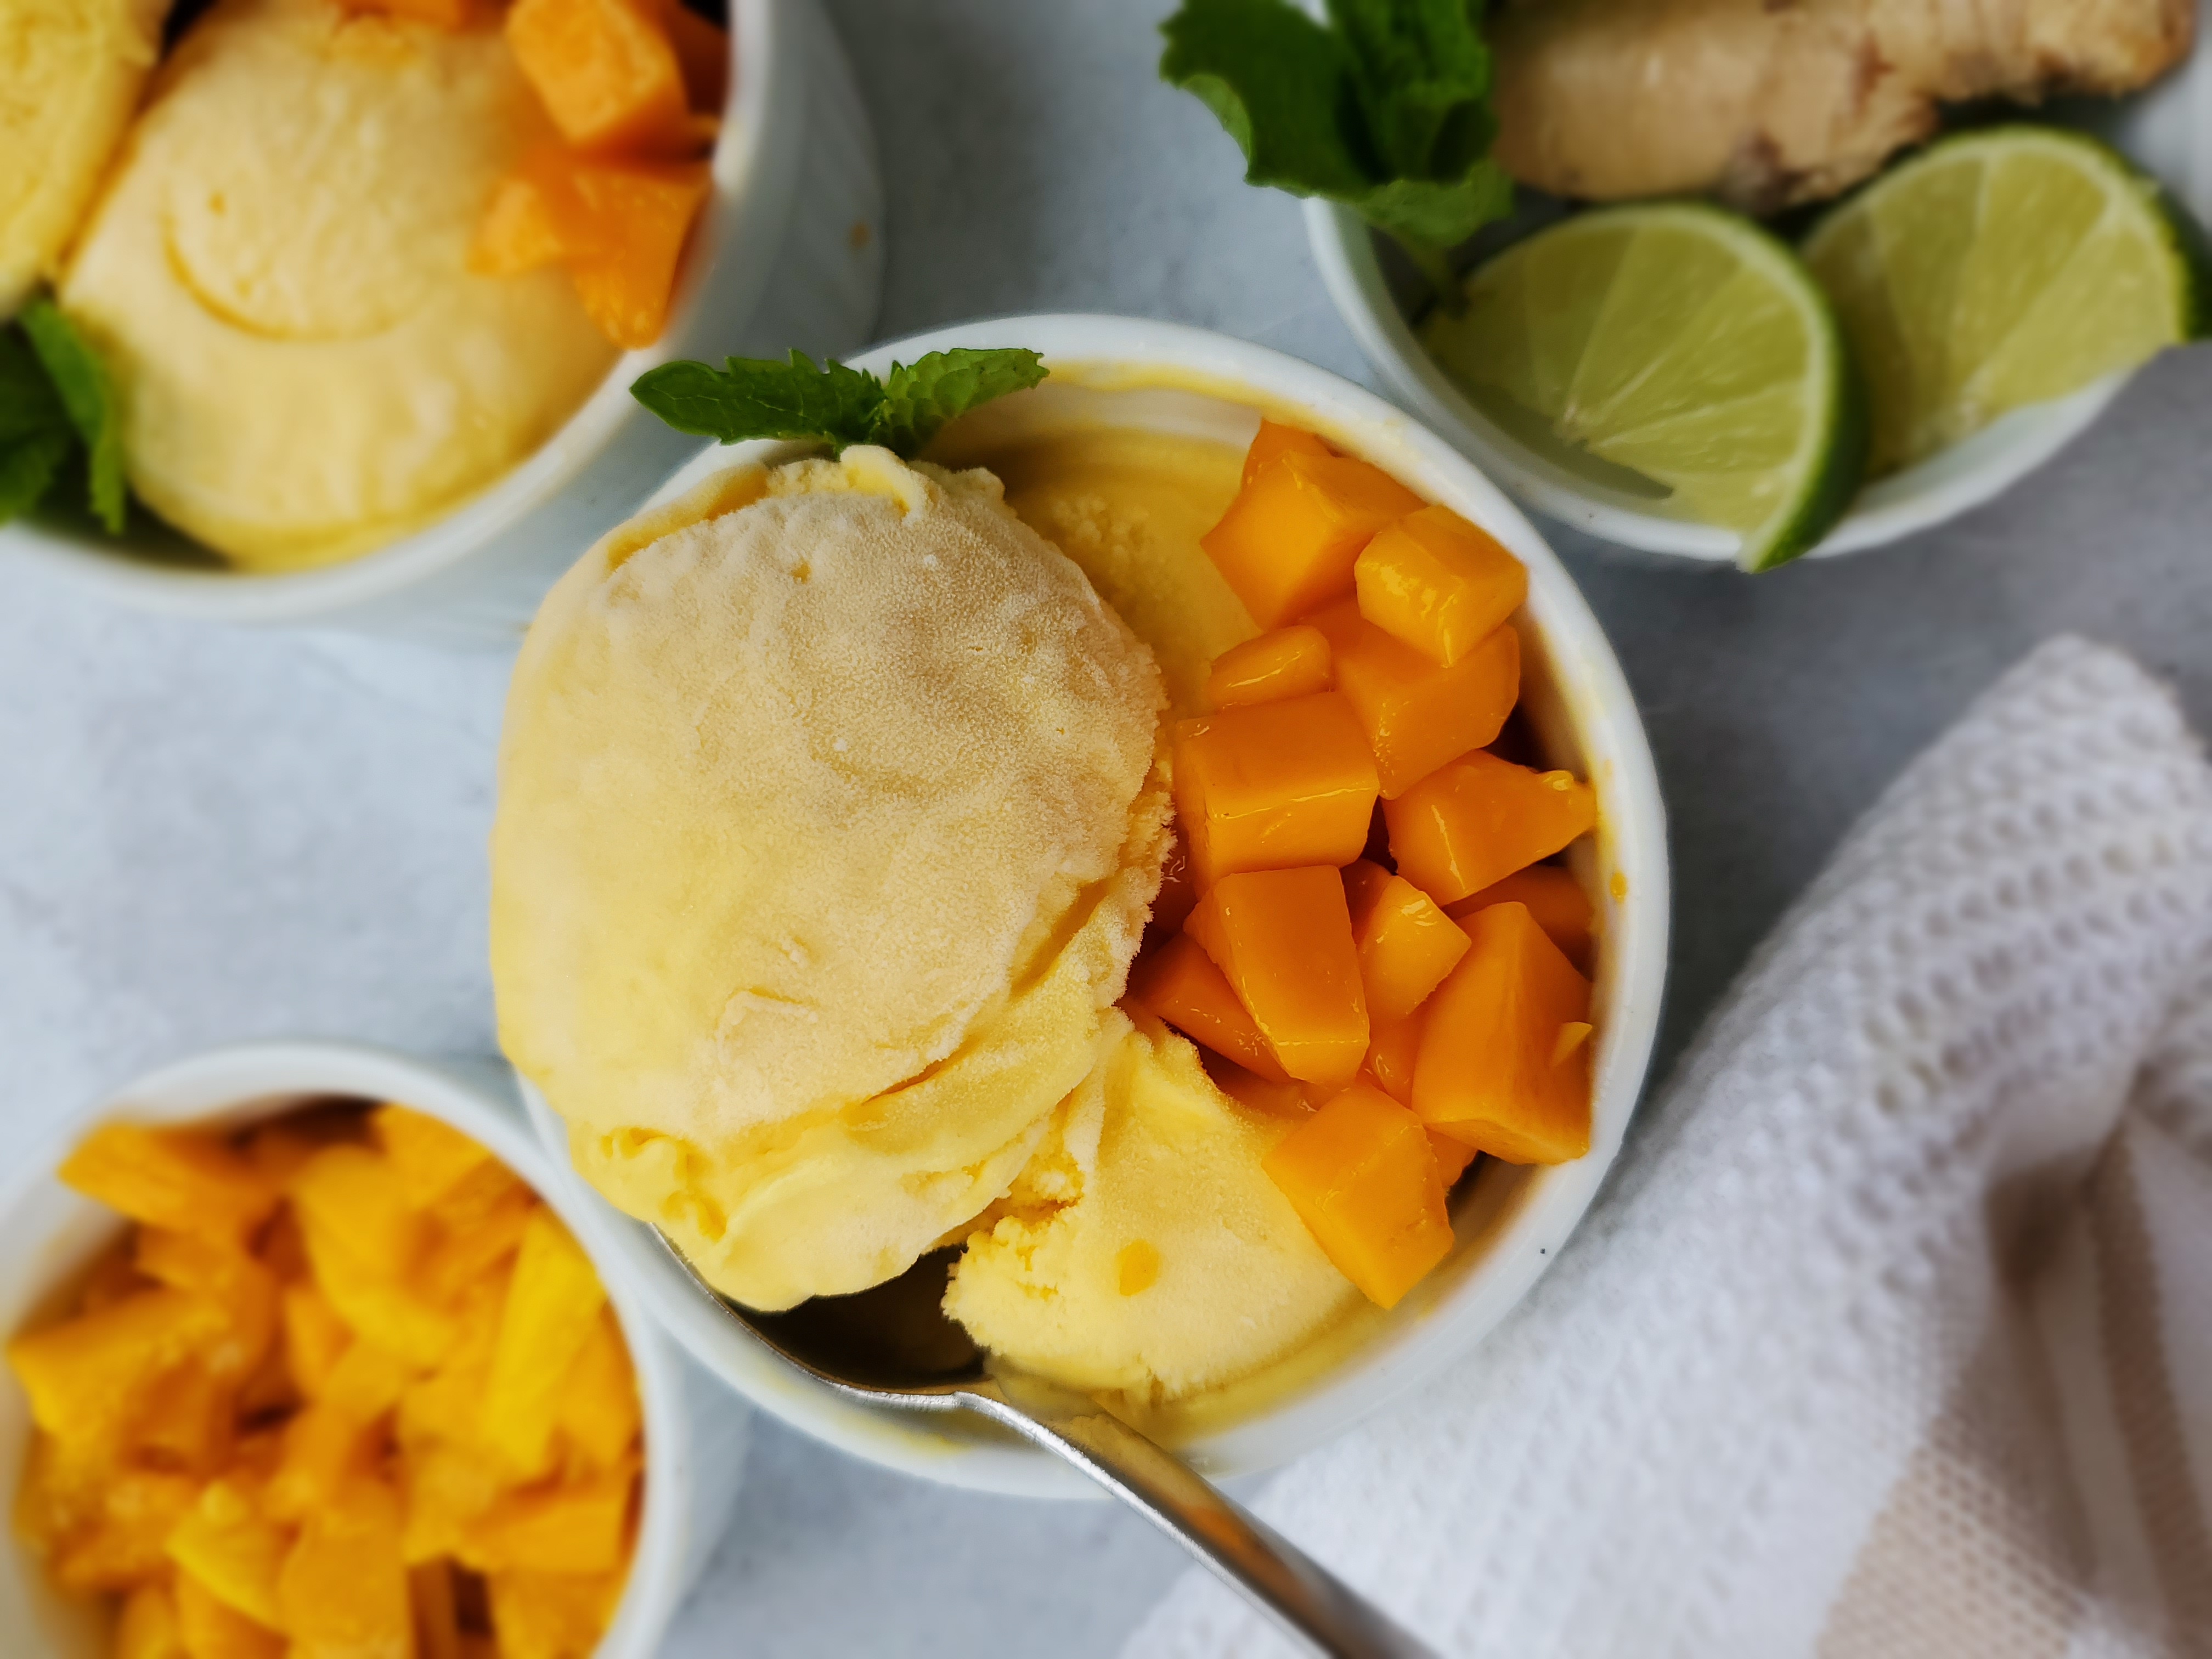 Mango Gelato in a bowl with pieces of mango on top